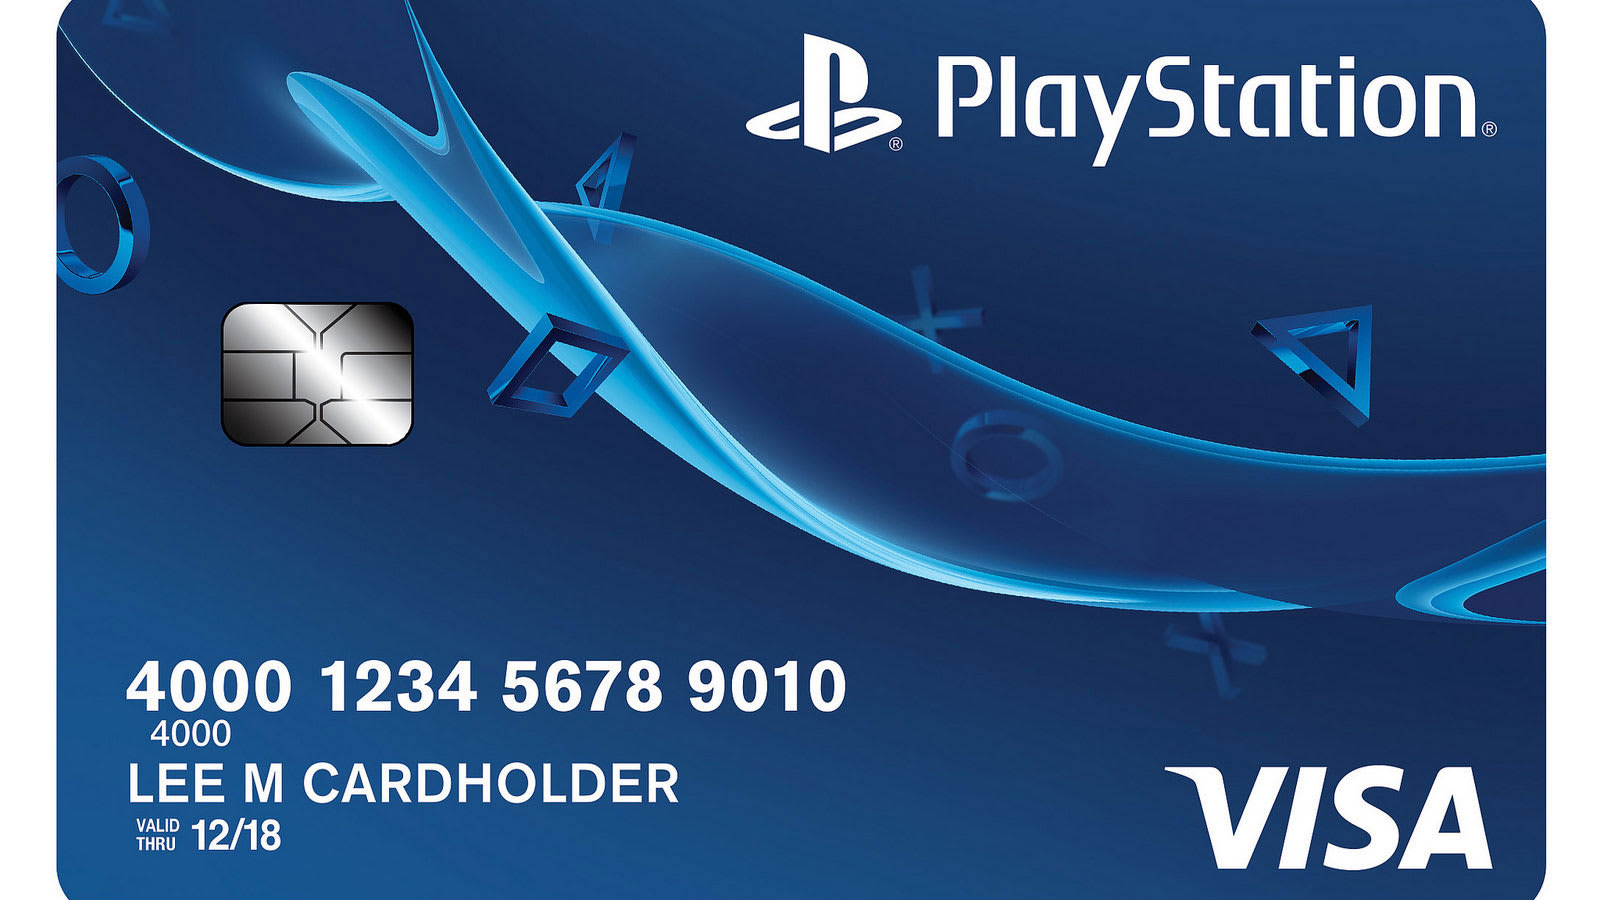 PlayStation credit card gives extra money back for gaming ...